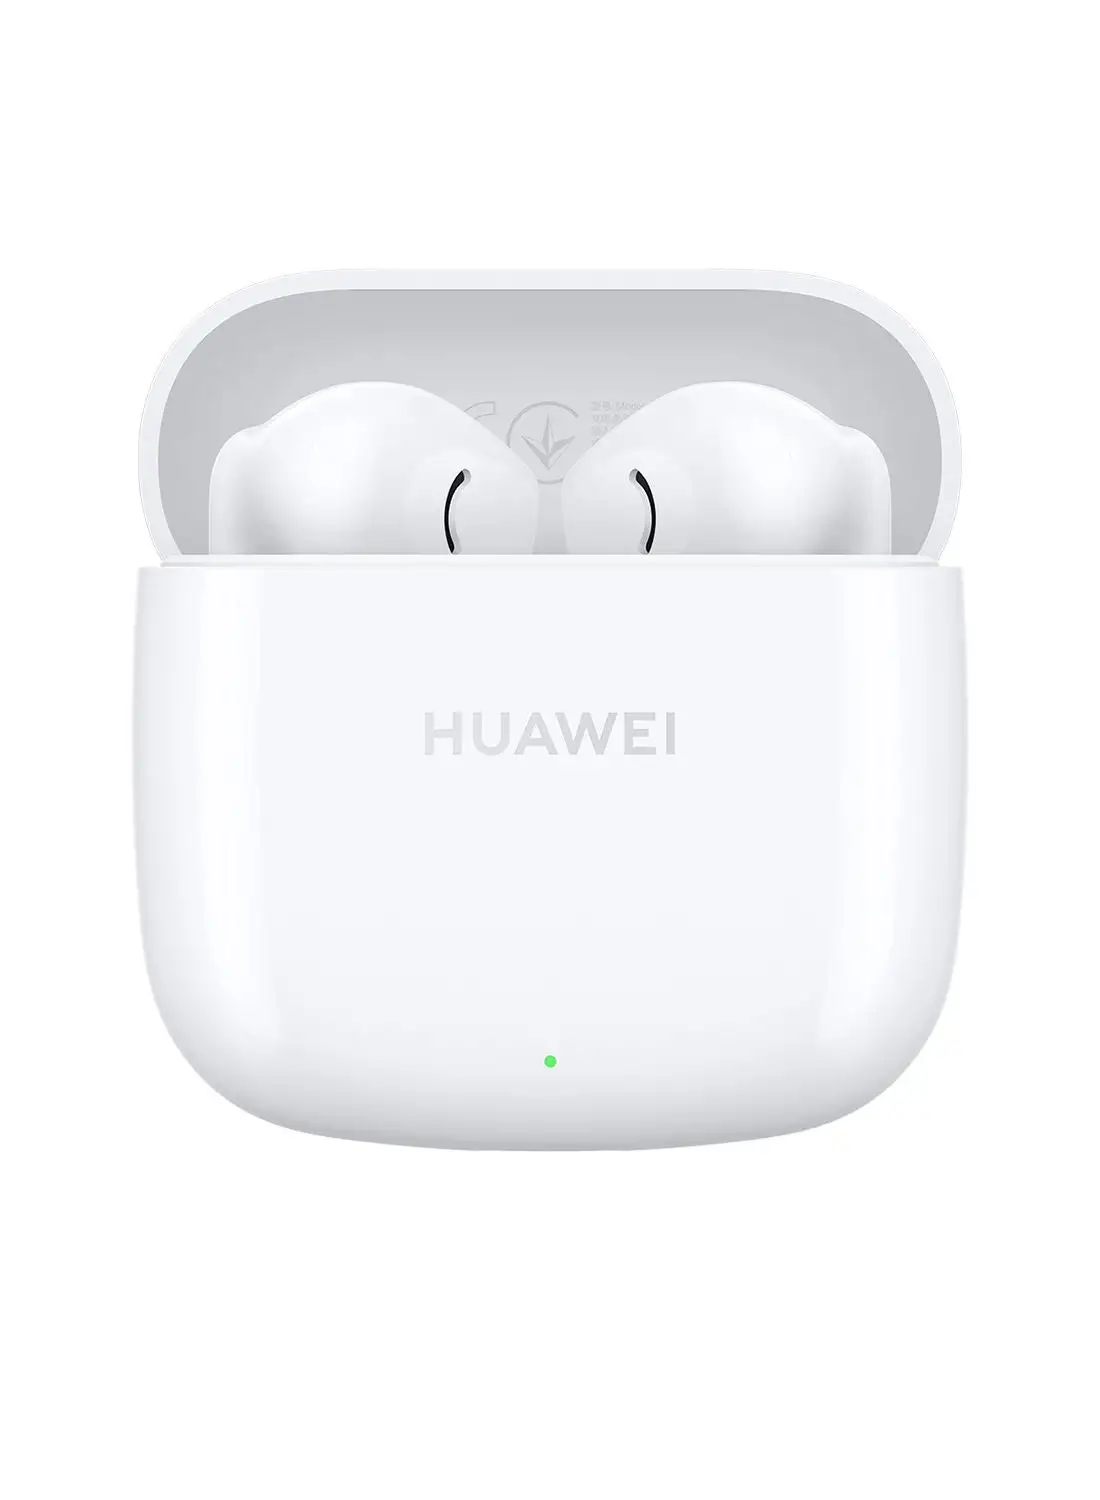 HUAWEI FreeBuds SE 2 In-ear Earphones, Wireless Bluetooth 5.3, 40-Hour Battery Life, 3 Hours of Music Playback on a 10-Minute Charge, Compact and Comfortable, IP54 Dust and Splash-Resistance Ceramic White